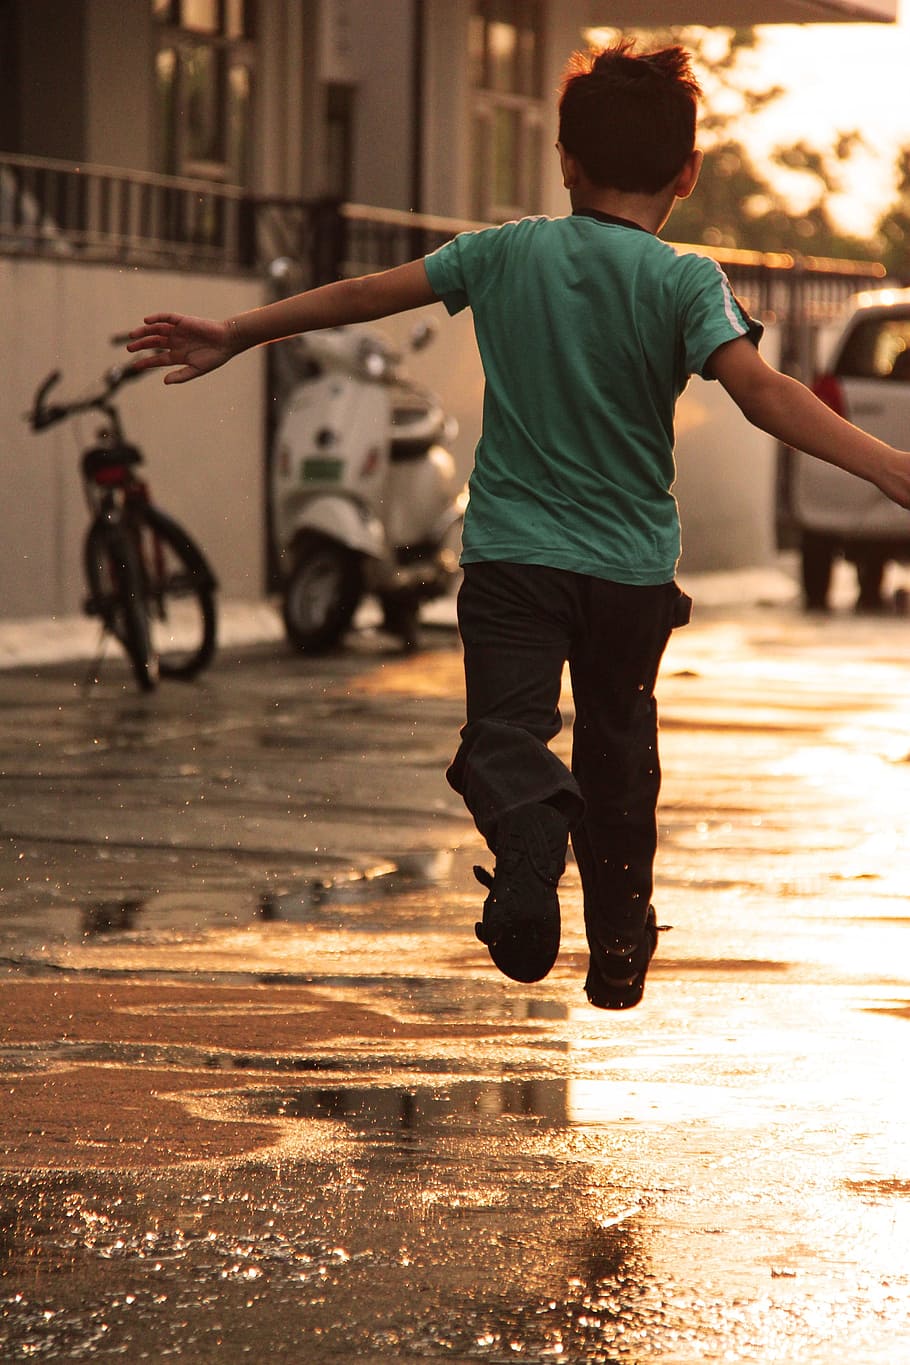 boy in teal t-shirt and black pants jumping on road, kid, enjoy